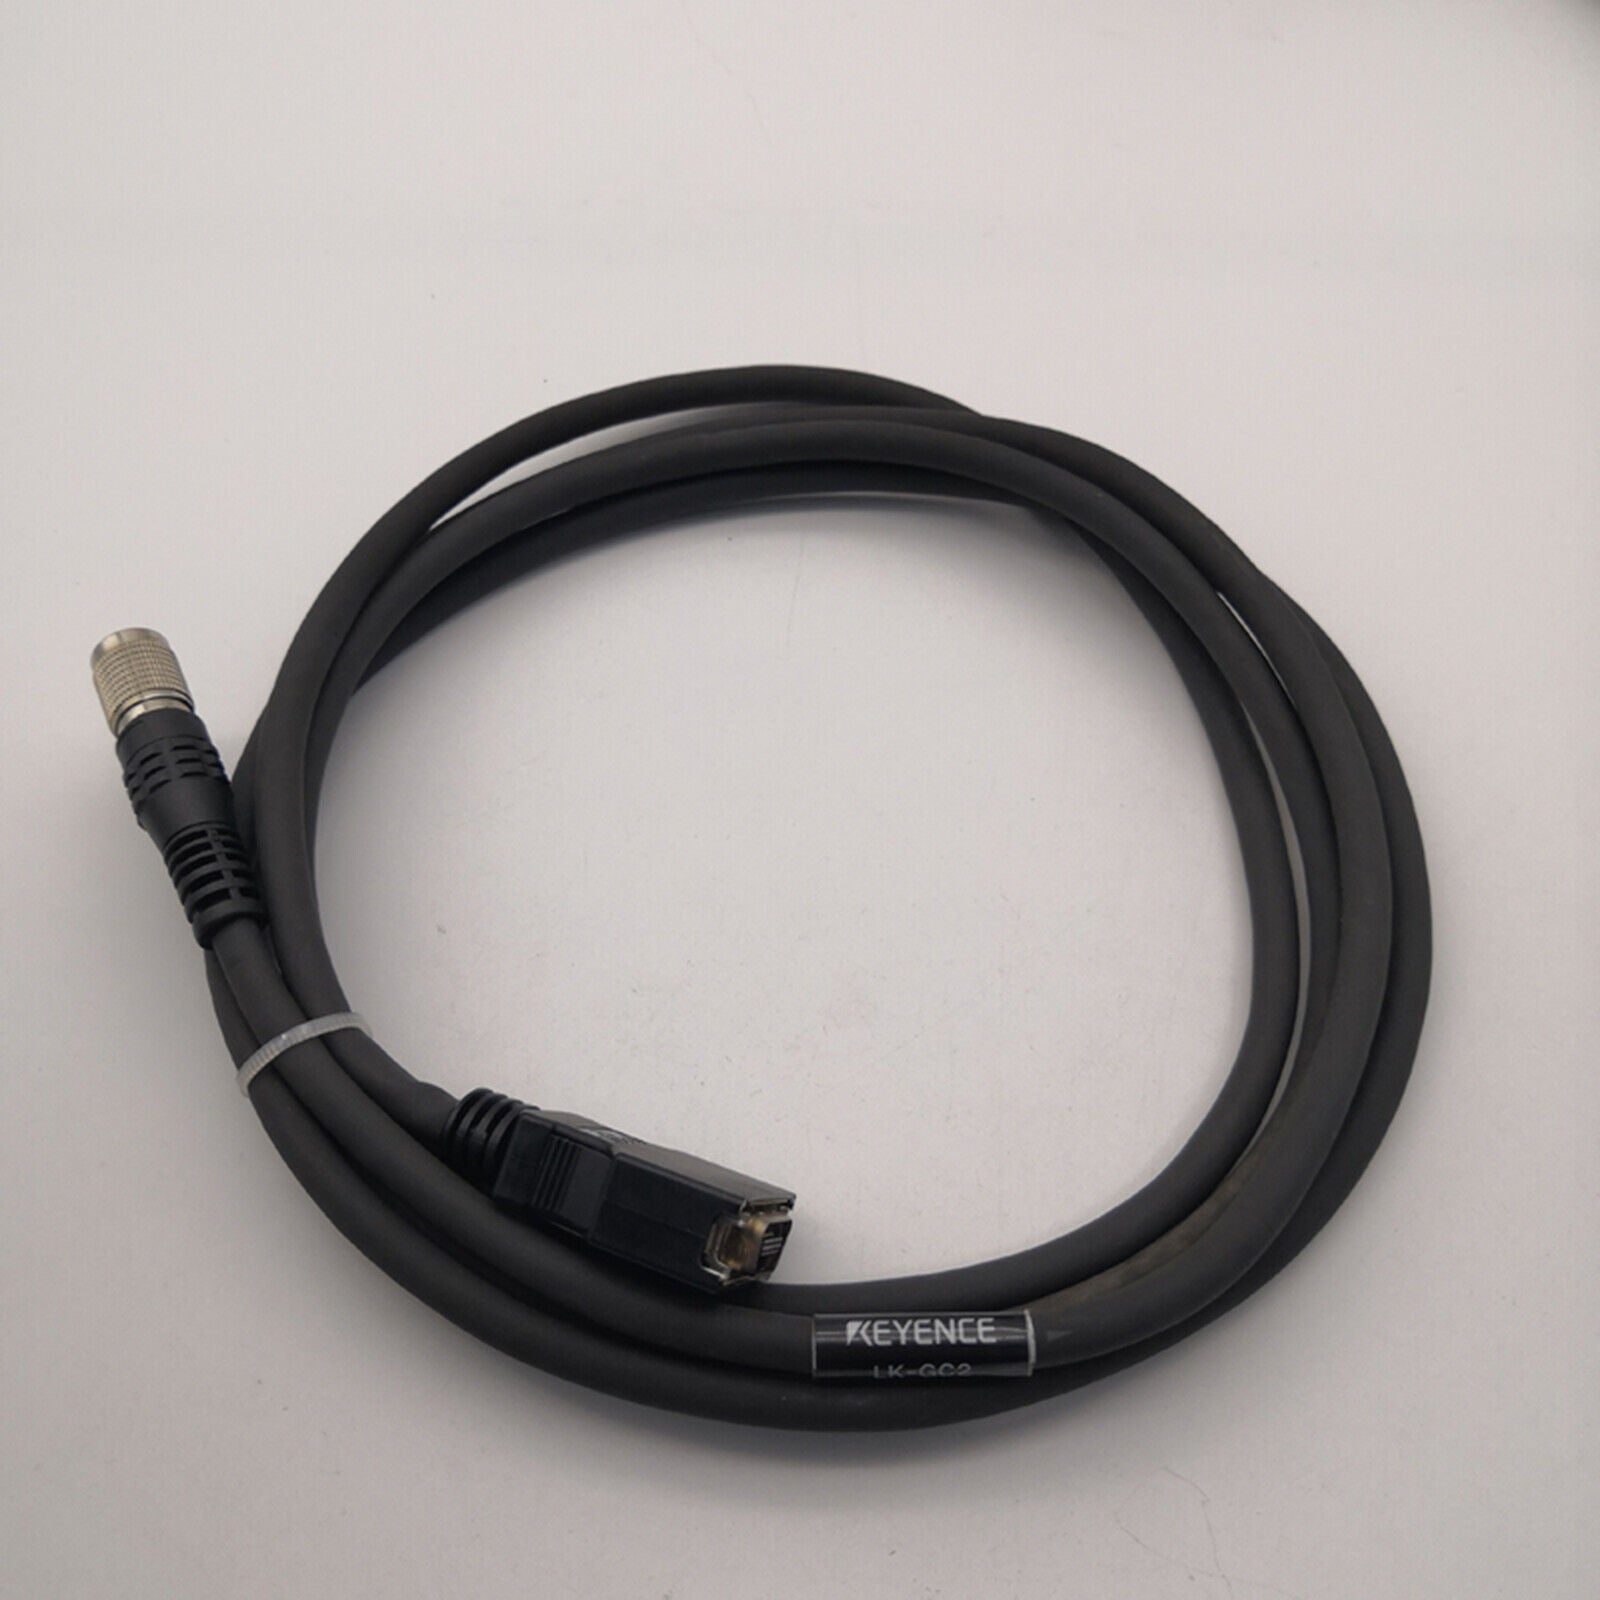 used one  Keyence LK-GC2 Laser sensor connection cable